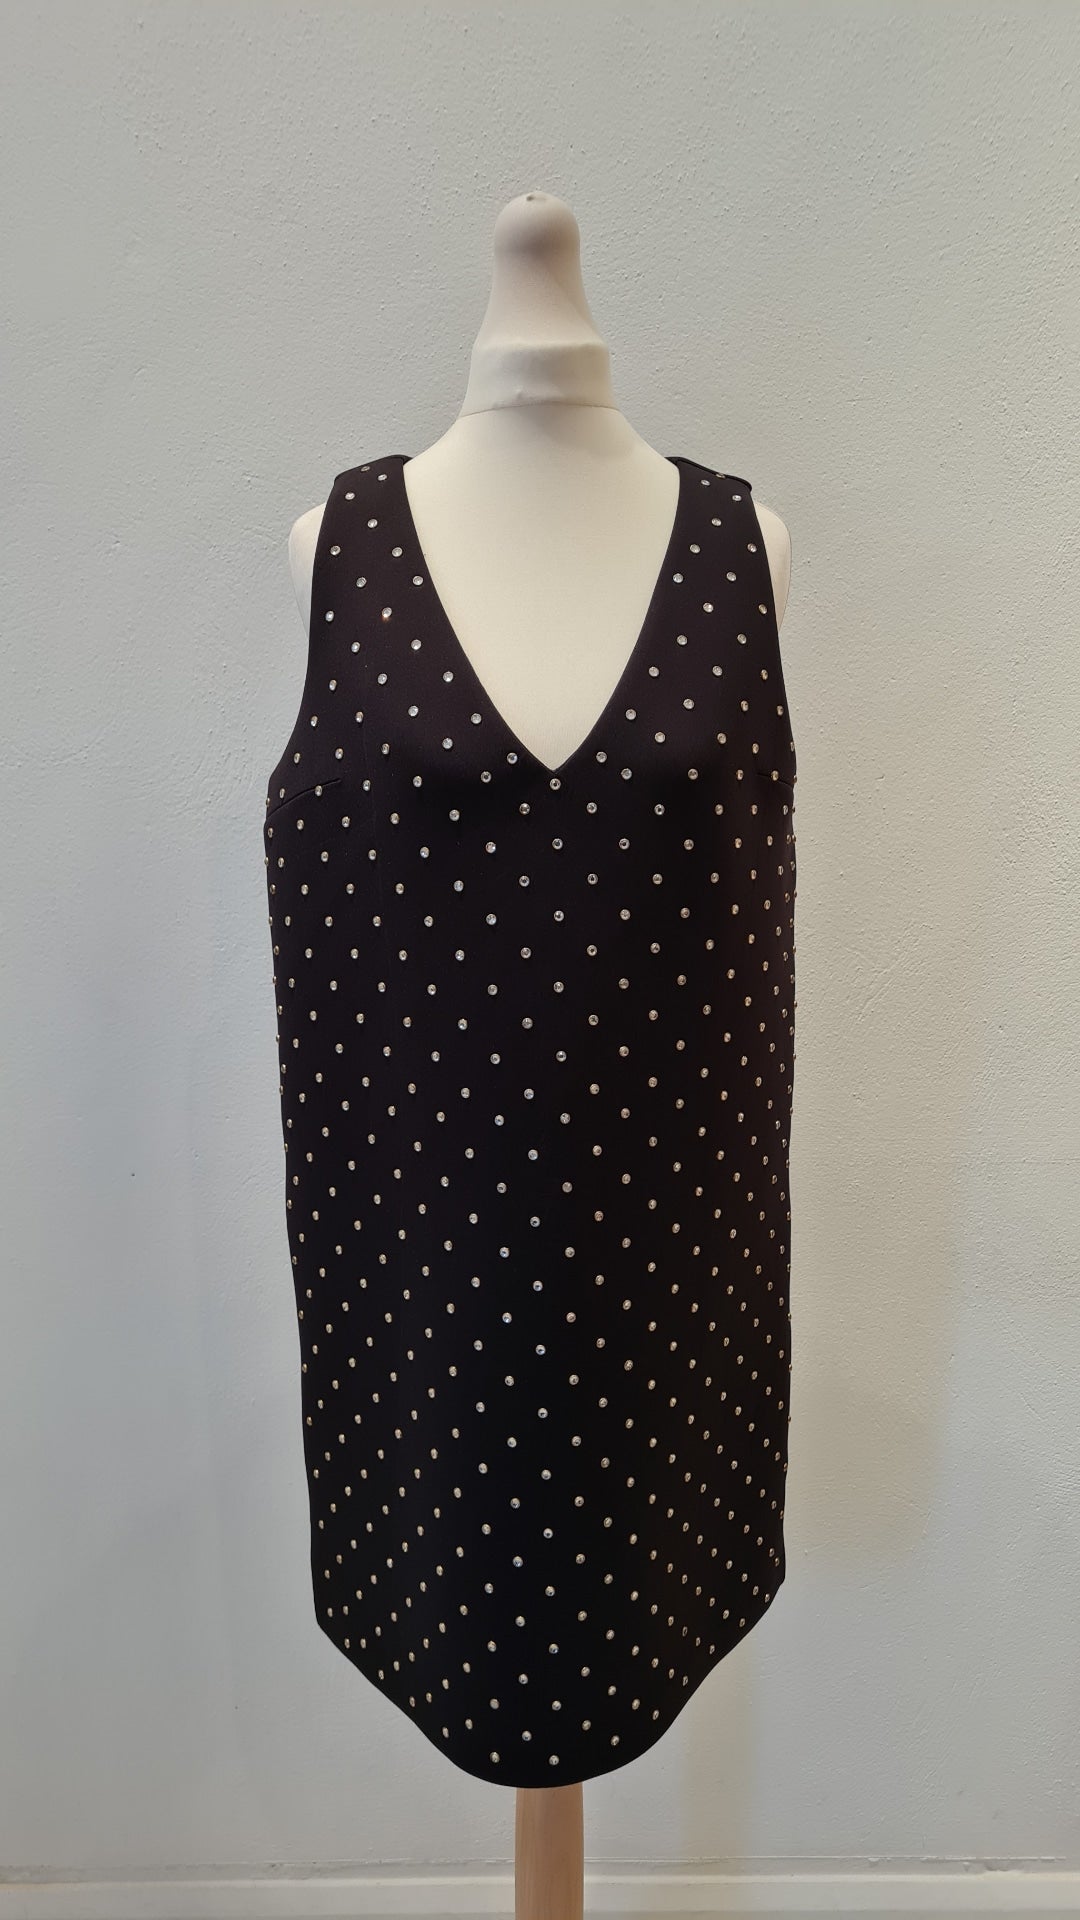 French Connection Black Diamonte Dress Size 10 (New)